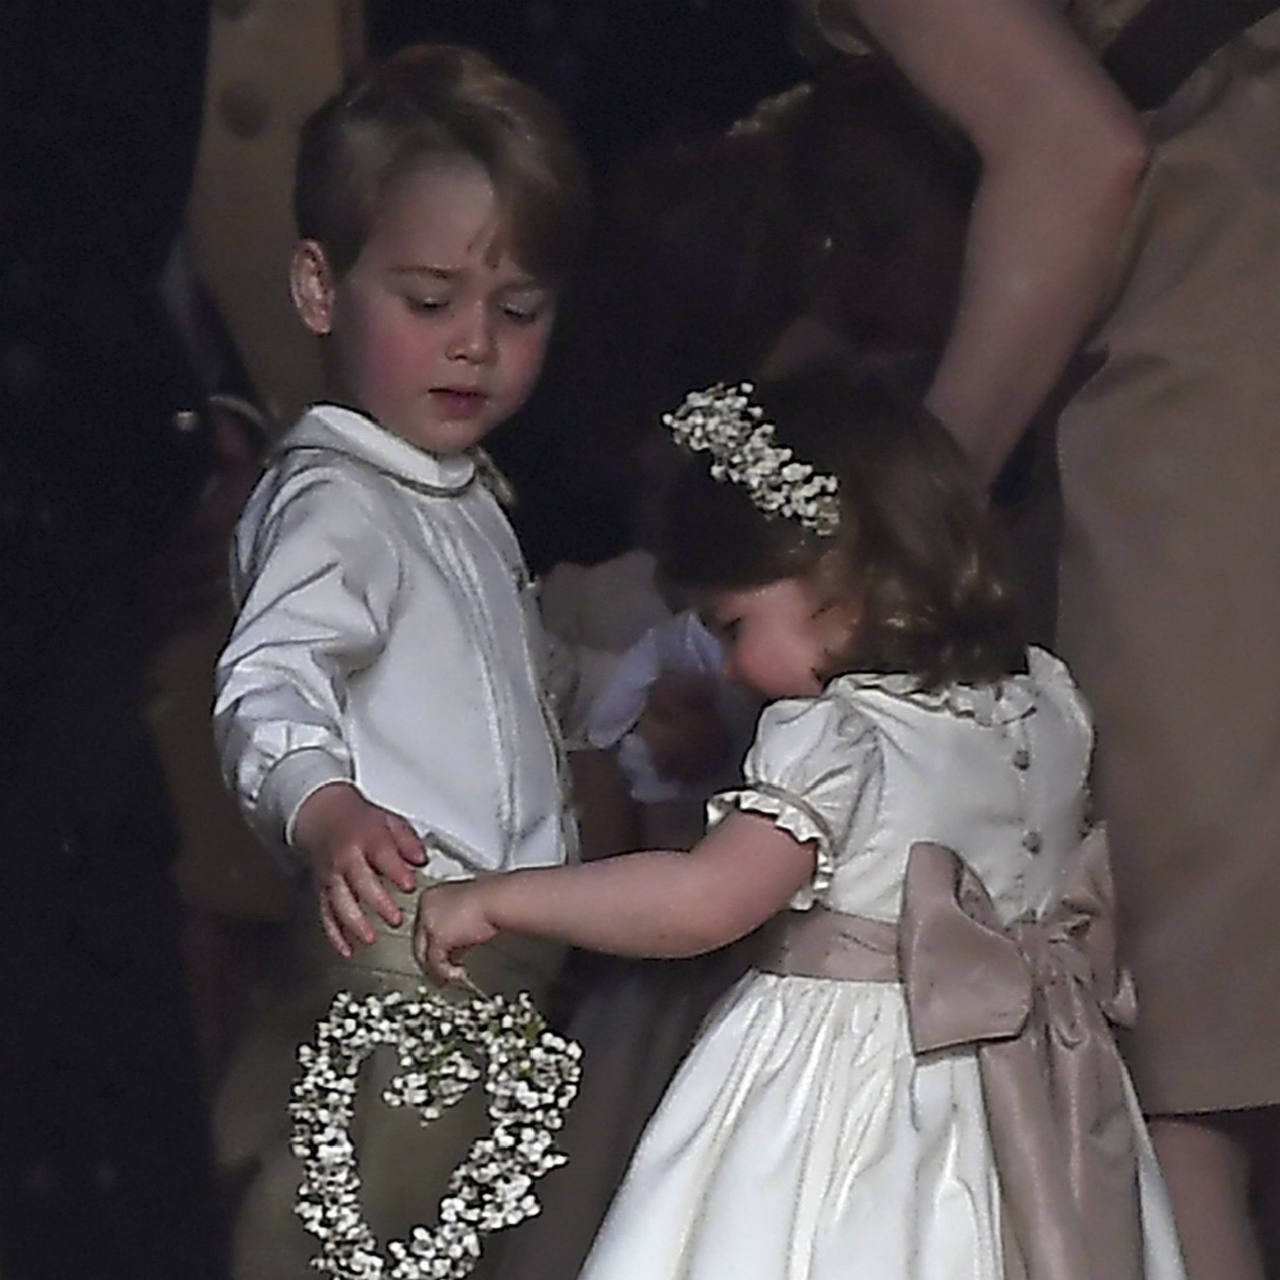 Prince George and Princess Charlotte arriving at Pippa Middleton's wedding